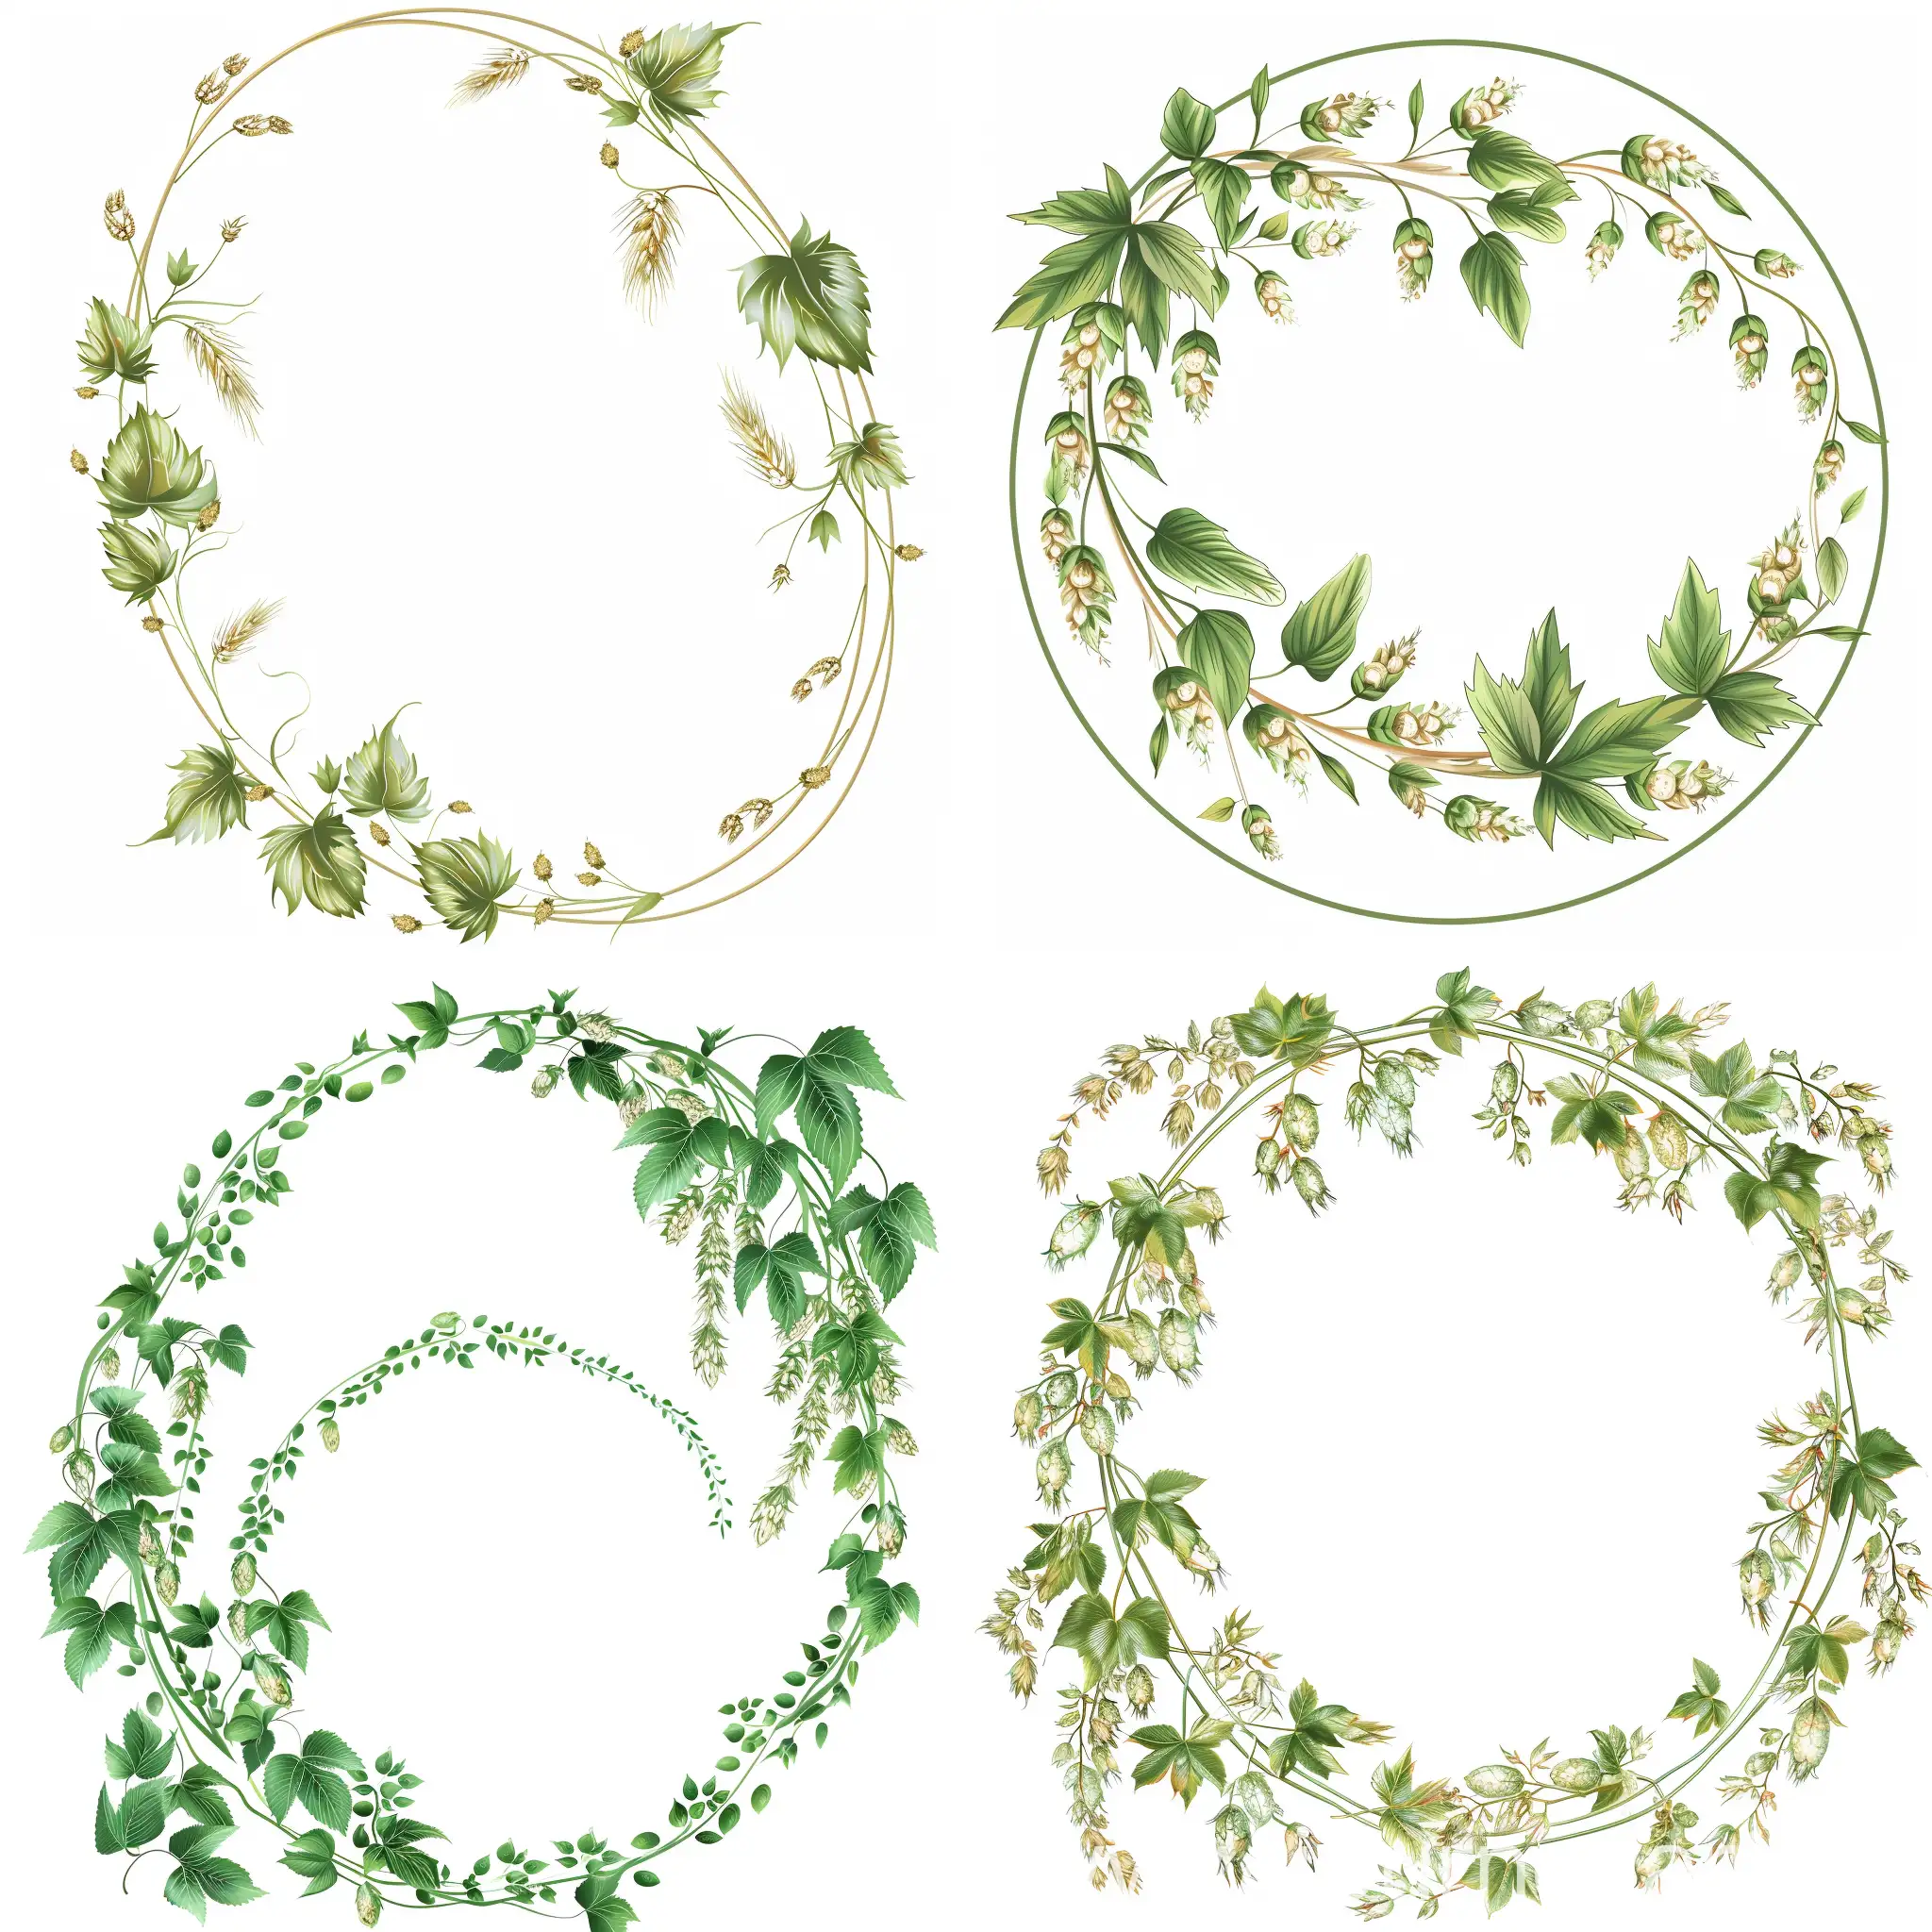 Victorian-Style-Oval-Ornament-with-Translucent-Leaves-and-Barley-Spikelets-on-White-Background